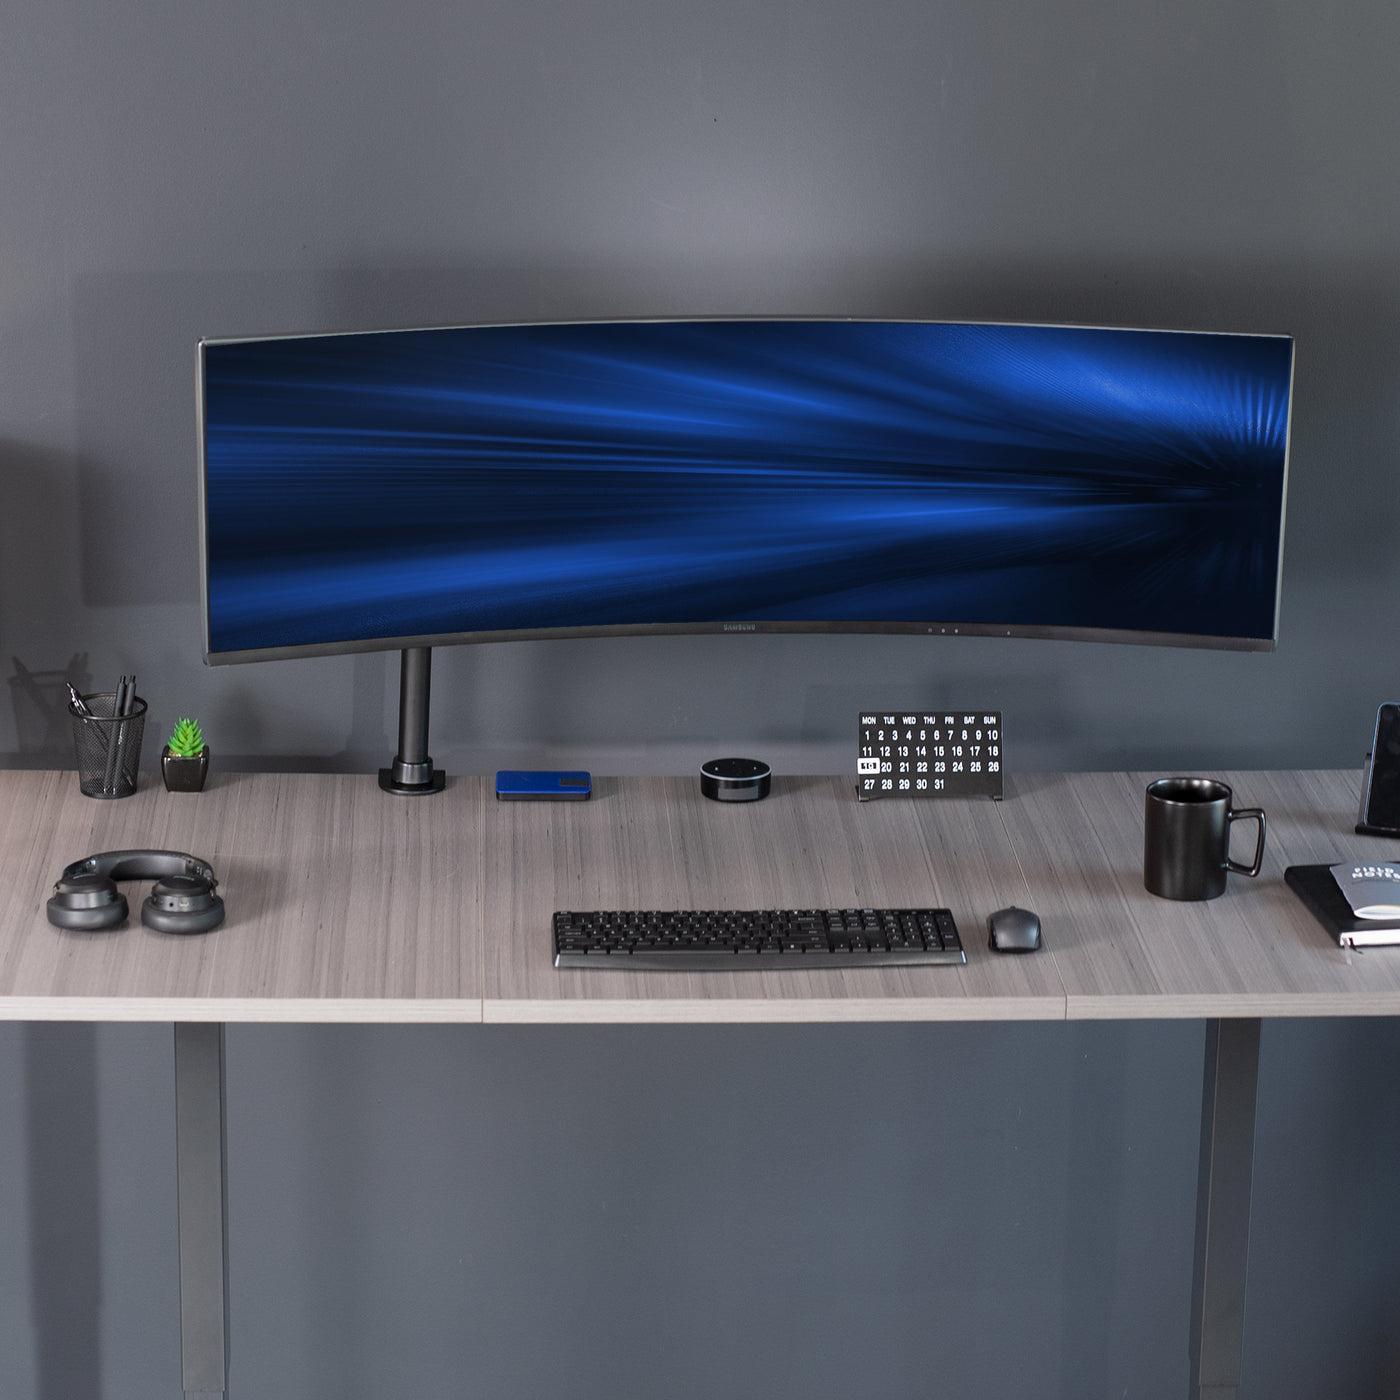 Single Ultrawide Monitor Desk Mount elevates ultra wide monitors to a comfortable viewing angle. The advanced tilt joint is designed to hold heavy screens securely.